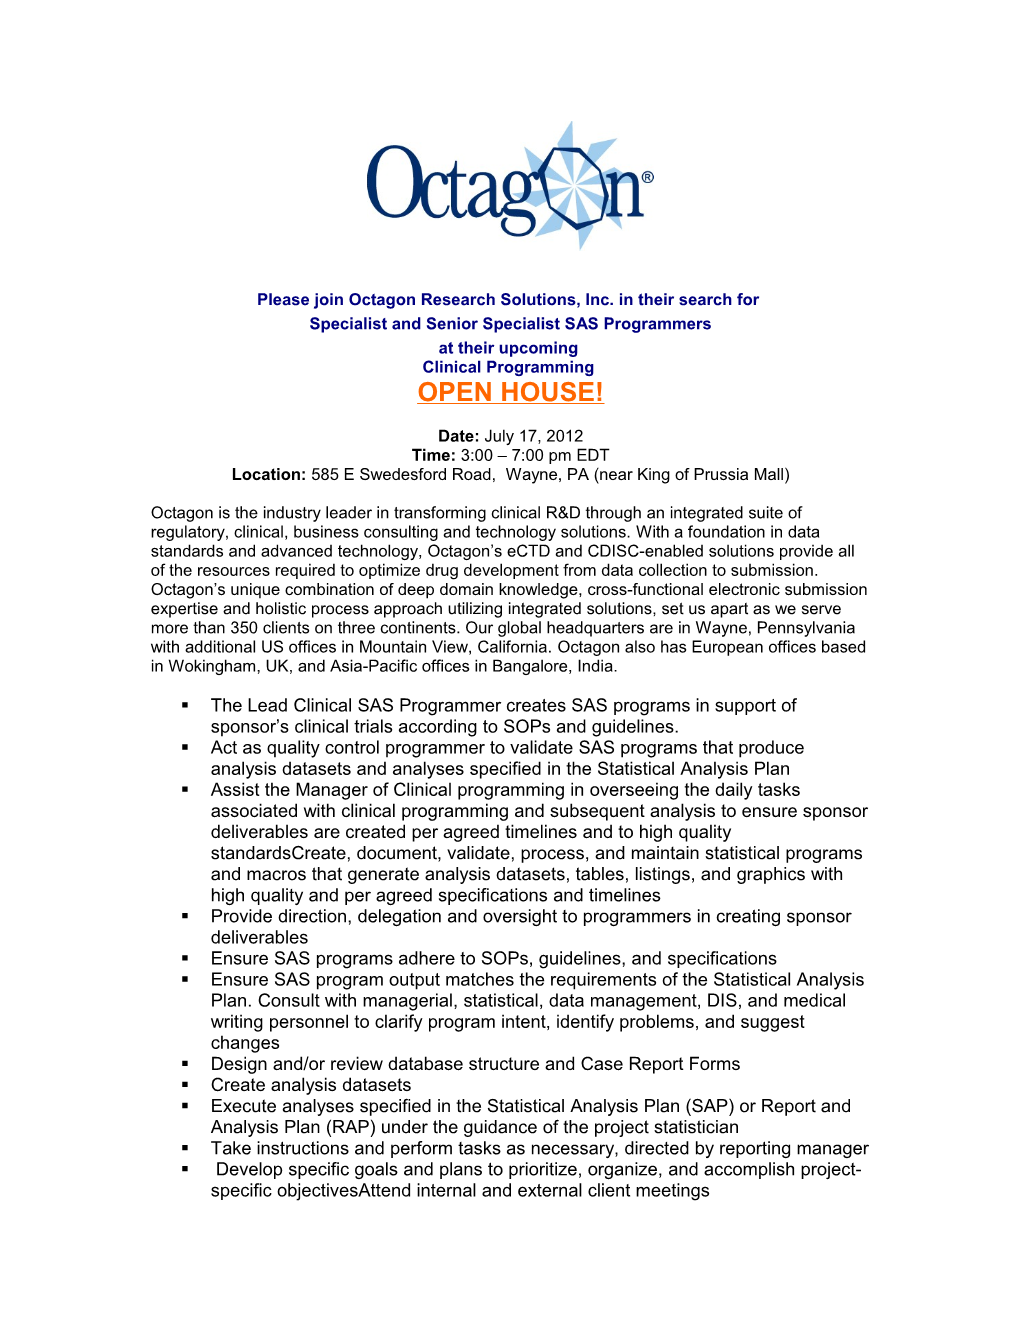 Please Join Octagon Research Solutions, Inc